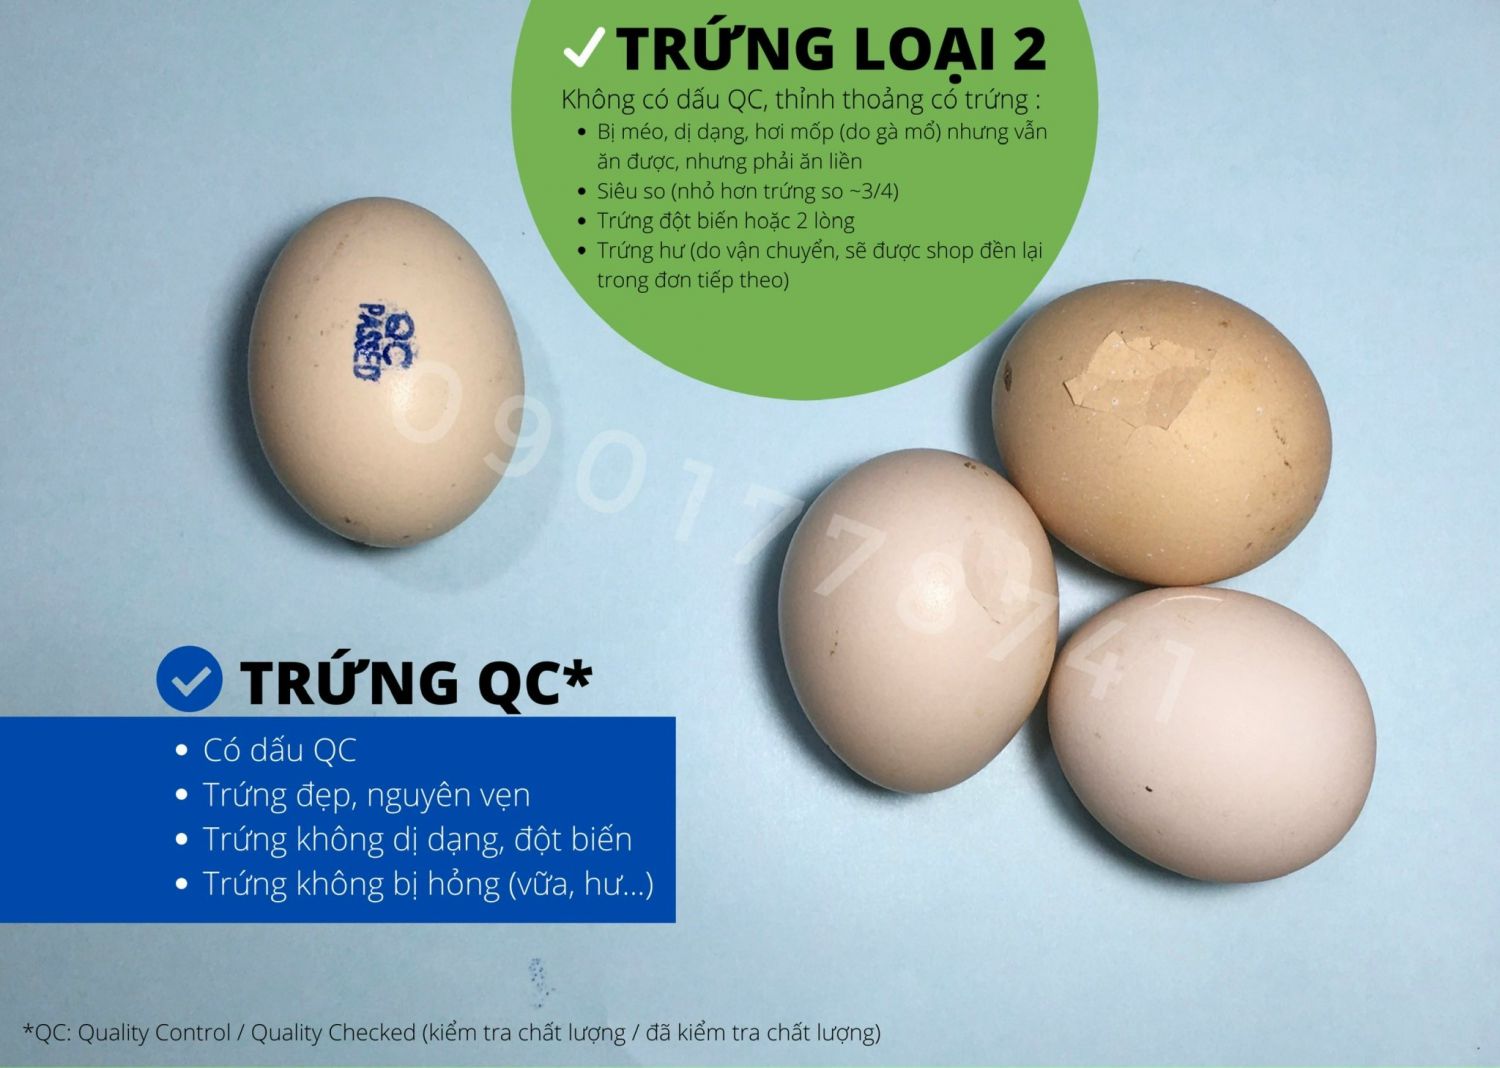 Quality Control and Premium Silky Fowl Eggs